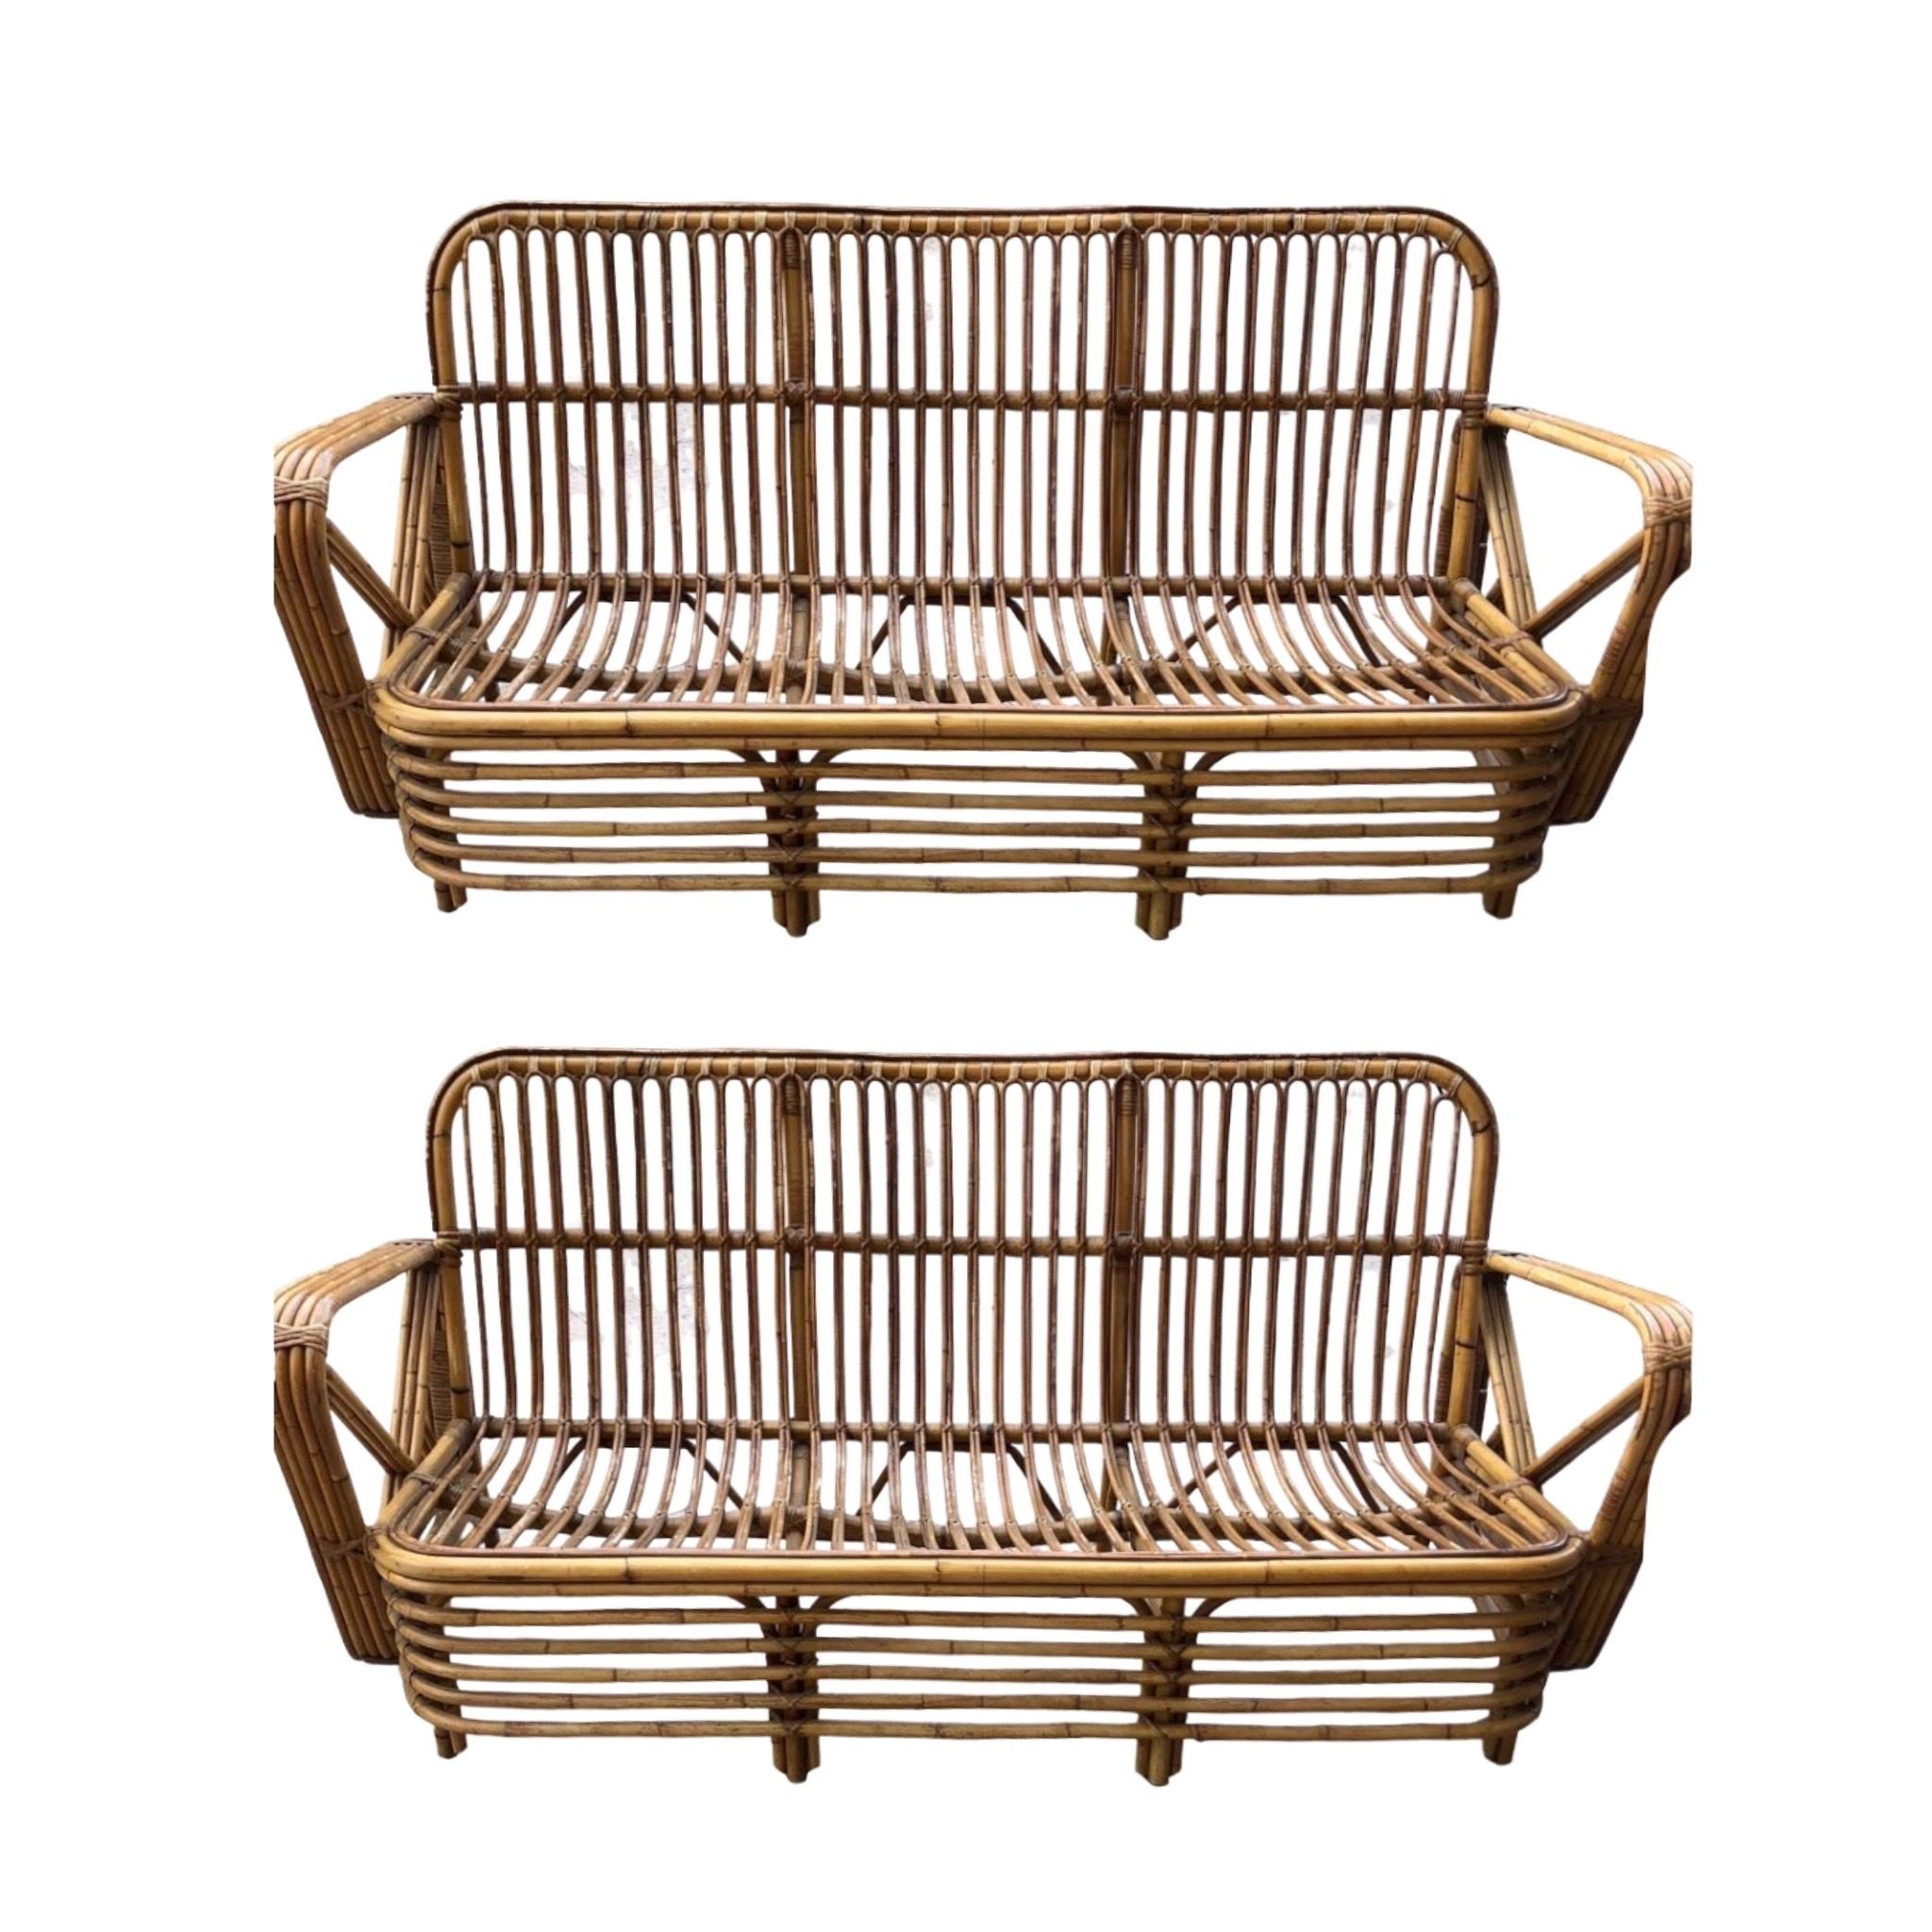 Pair of bamboo rattan sofas in the 1950s Paul Frankl style image